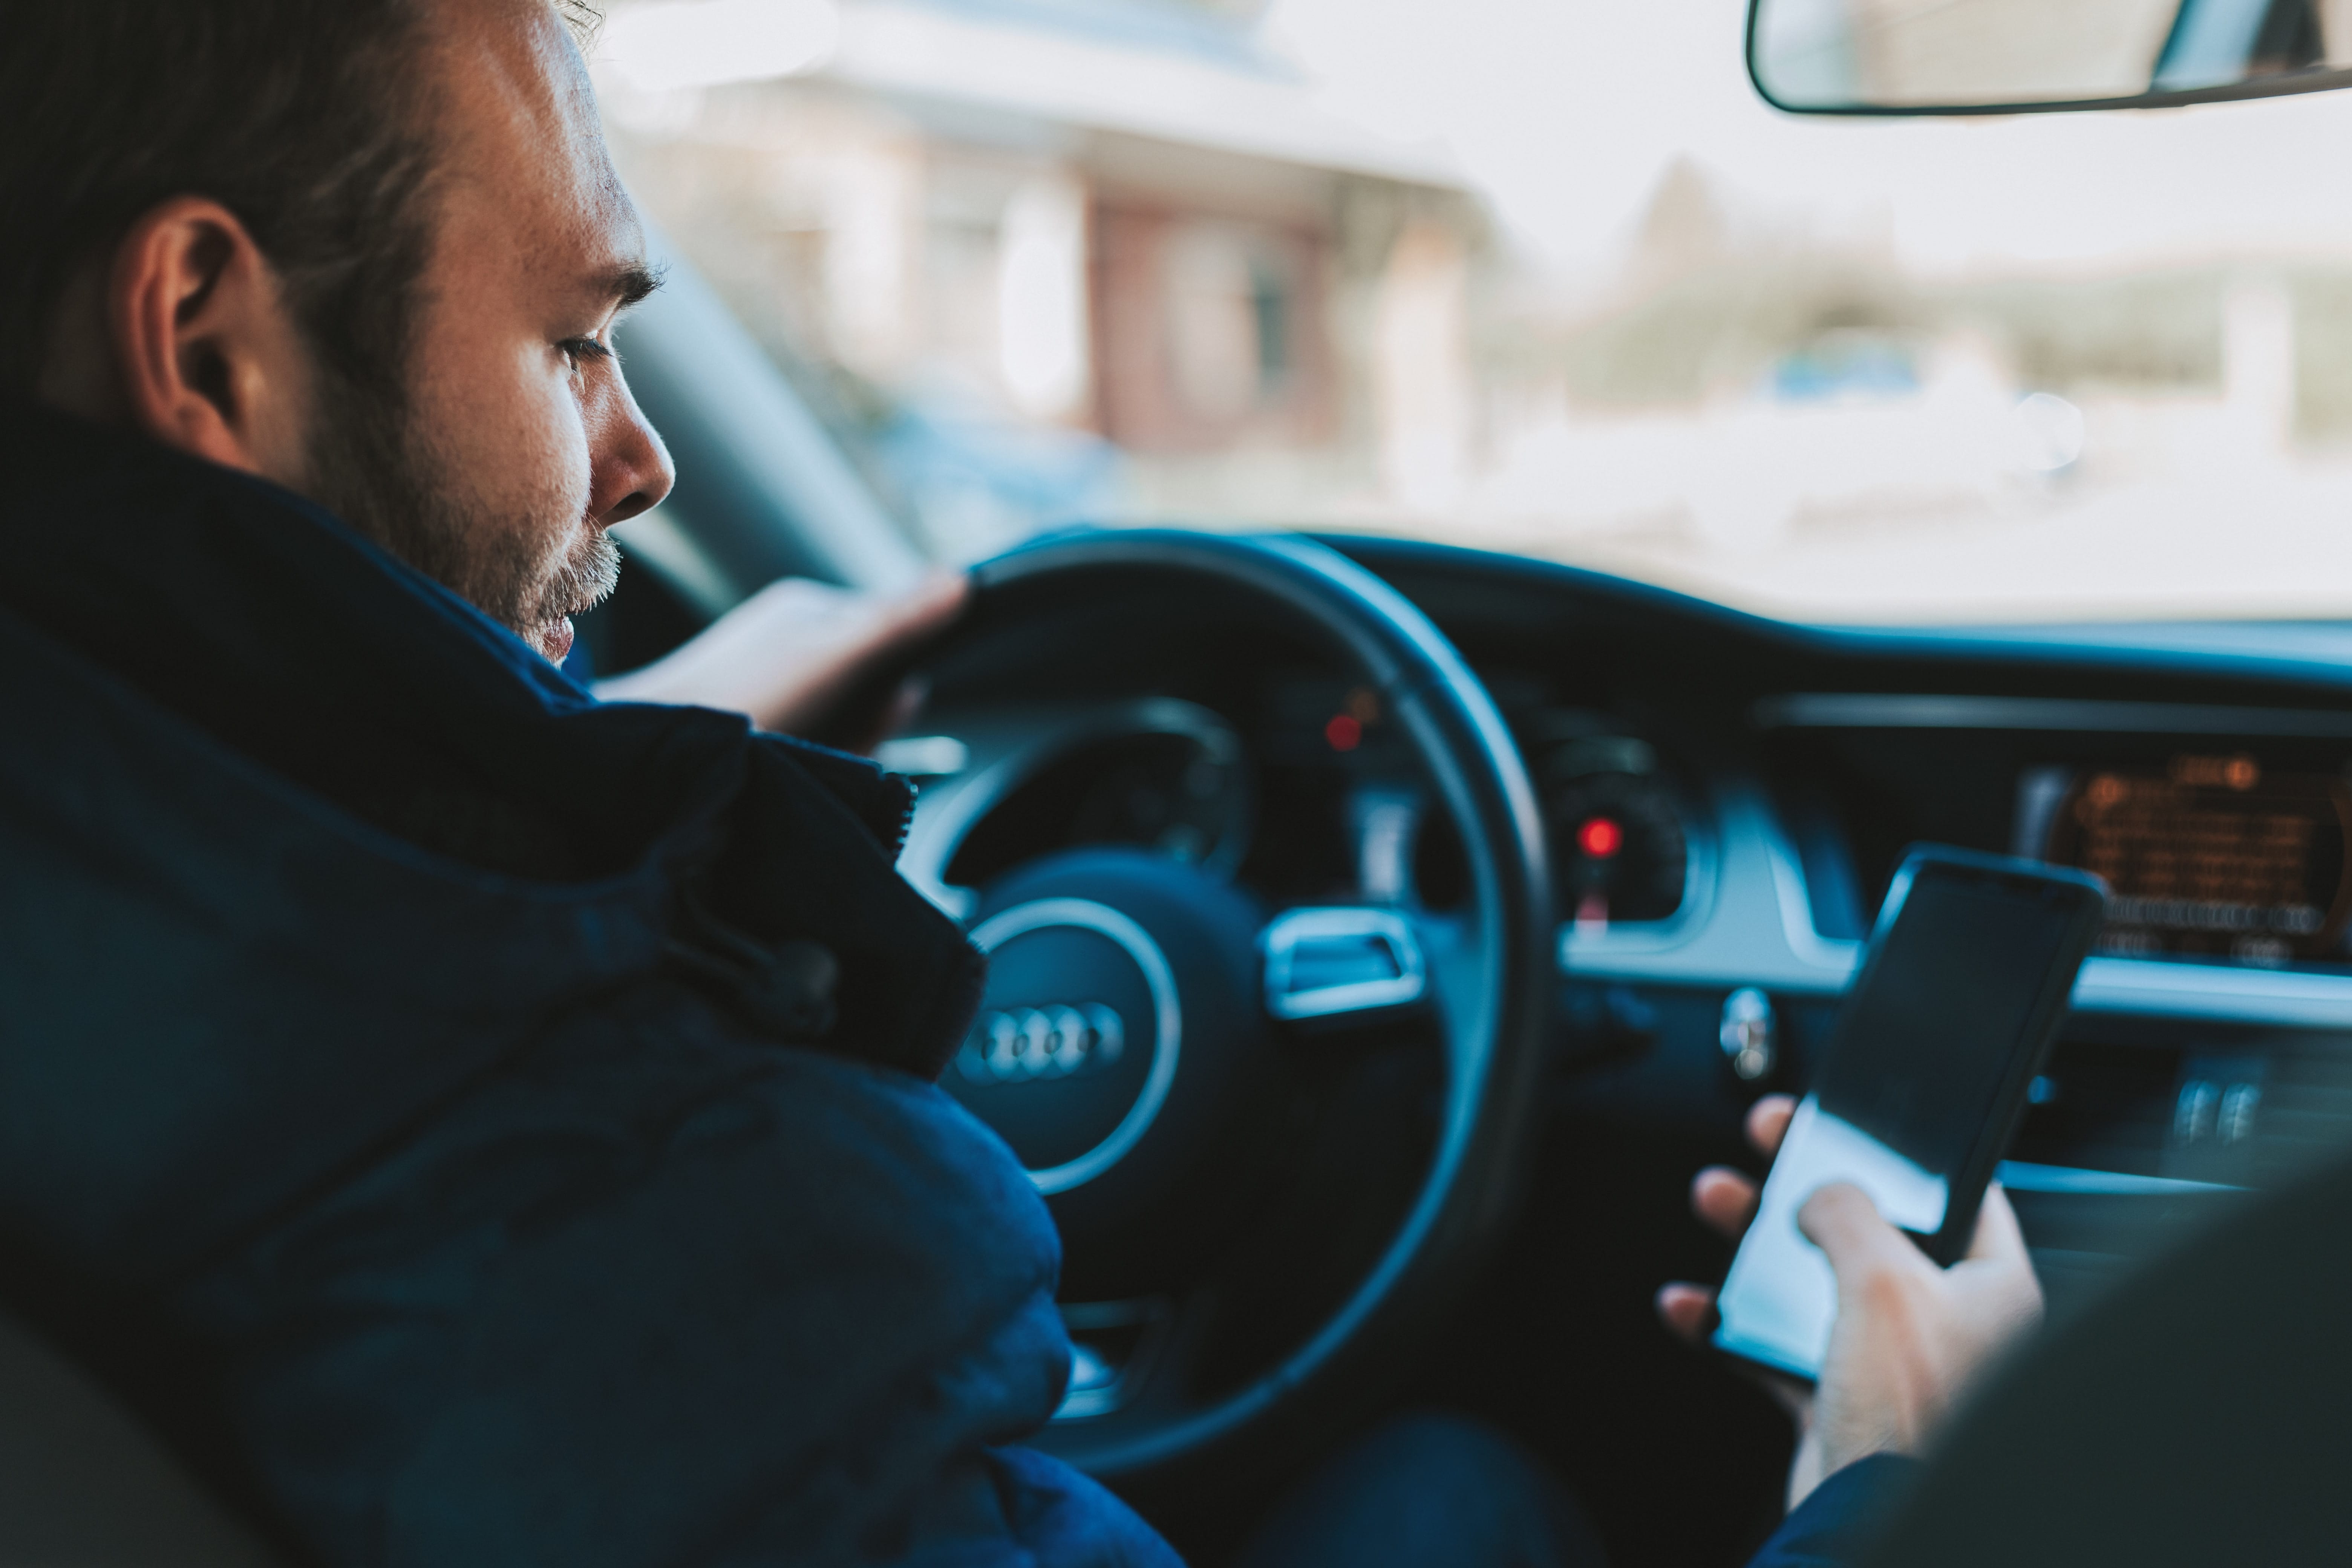 Man texting and driving; image by Alexandre Boucher, via Unsplash.com.